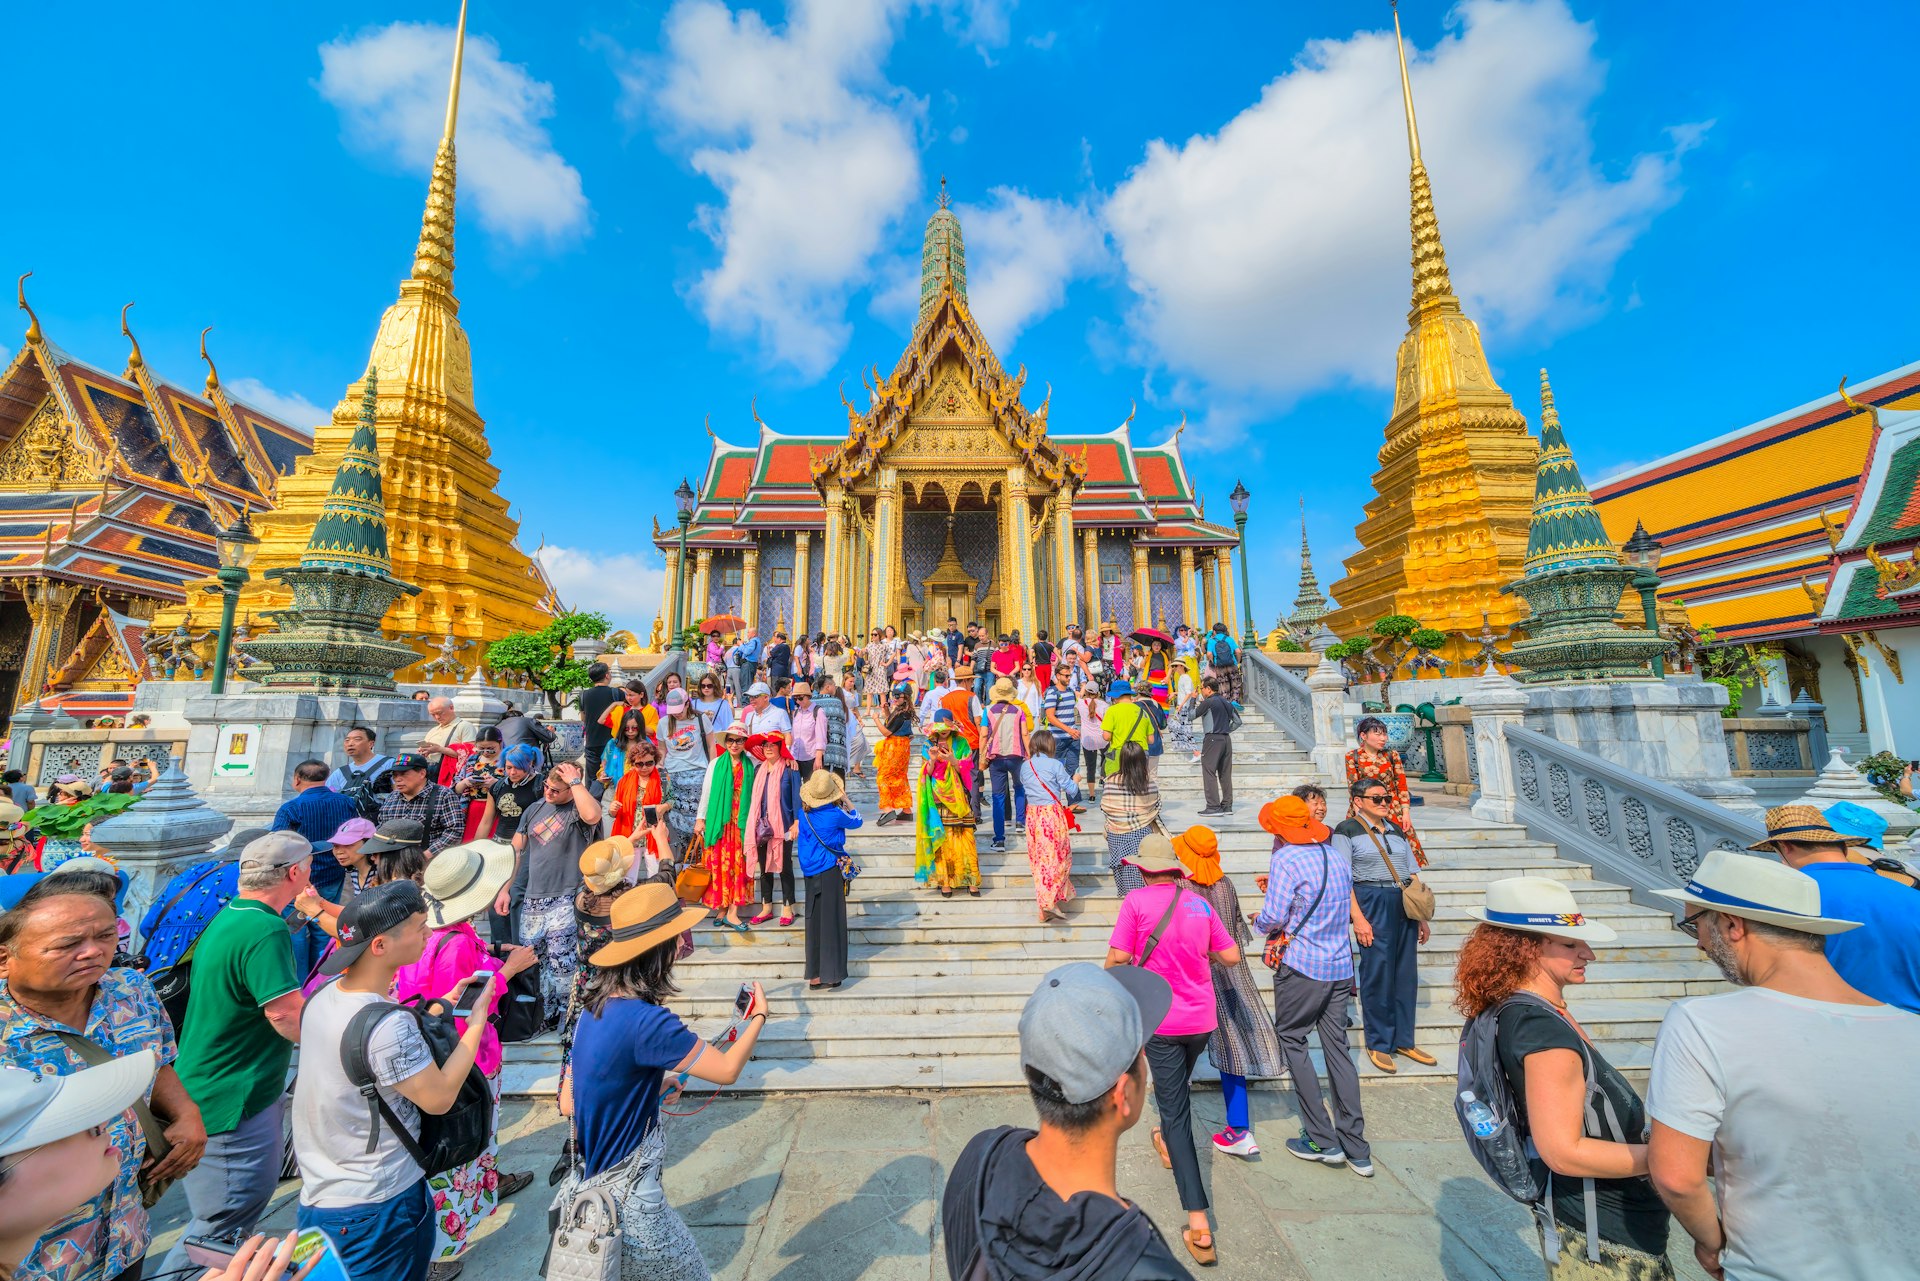 Tourists visiting the Wat Phra Kaew, Temple of the Emerald Buddha, and Grand Palace complex with the golden stupa rising in the background.